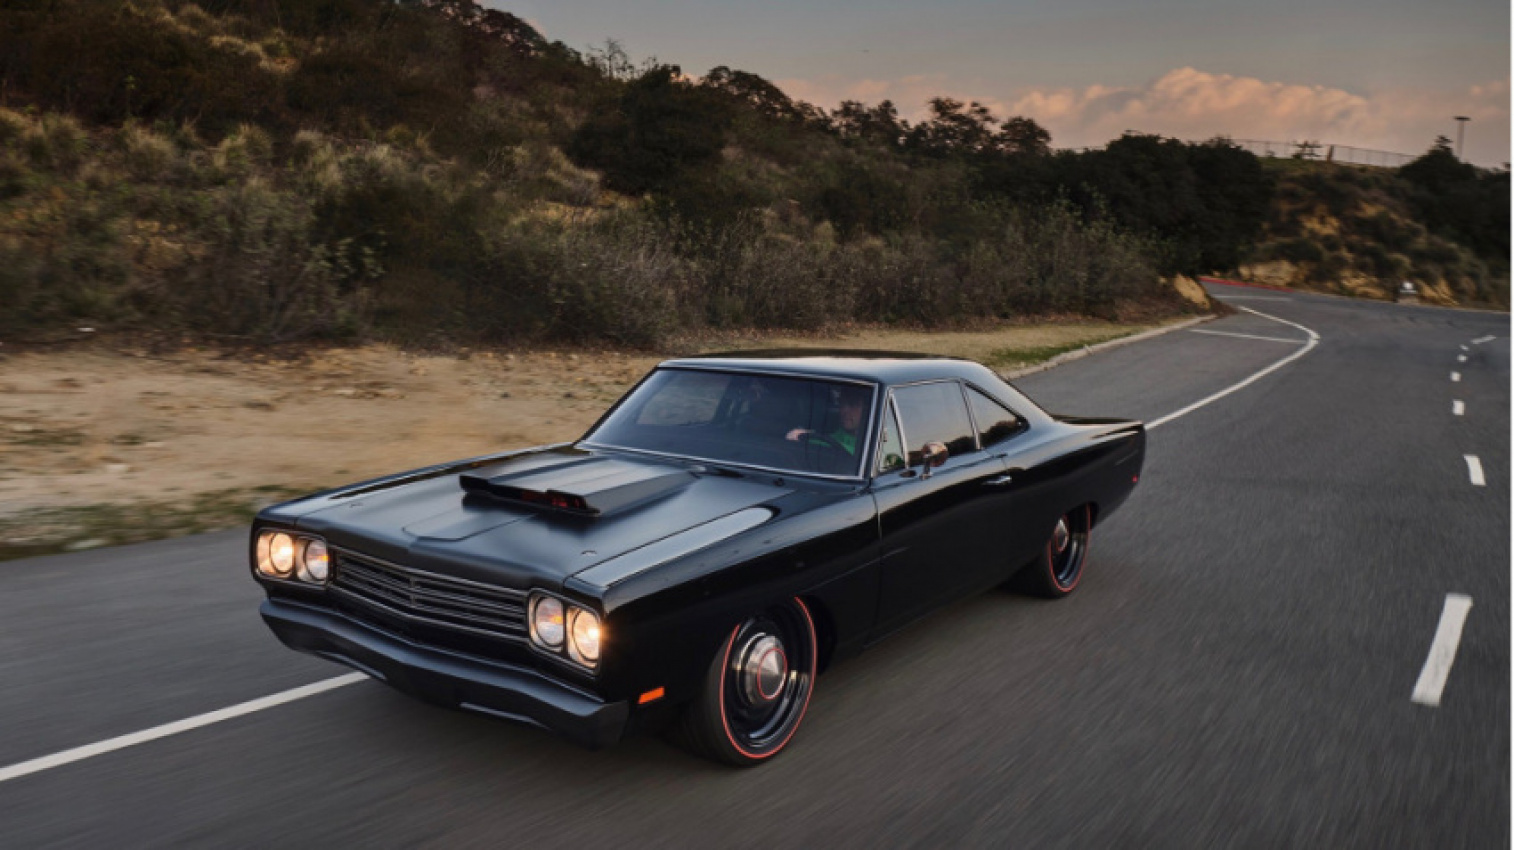 autos, cars, hp, plymouth, celebrities, classic cars, coupes, hemi, modified, mopar, muscle cars, plymouth road runner, kevin hart's 940-hp 1969 plymouth road runner build is named “michael meyers”